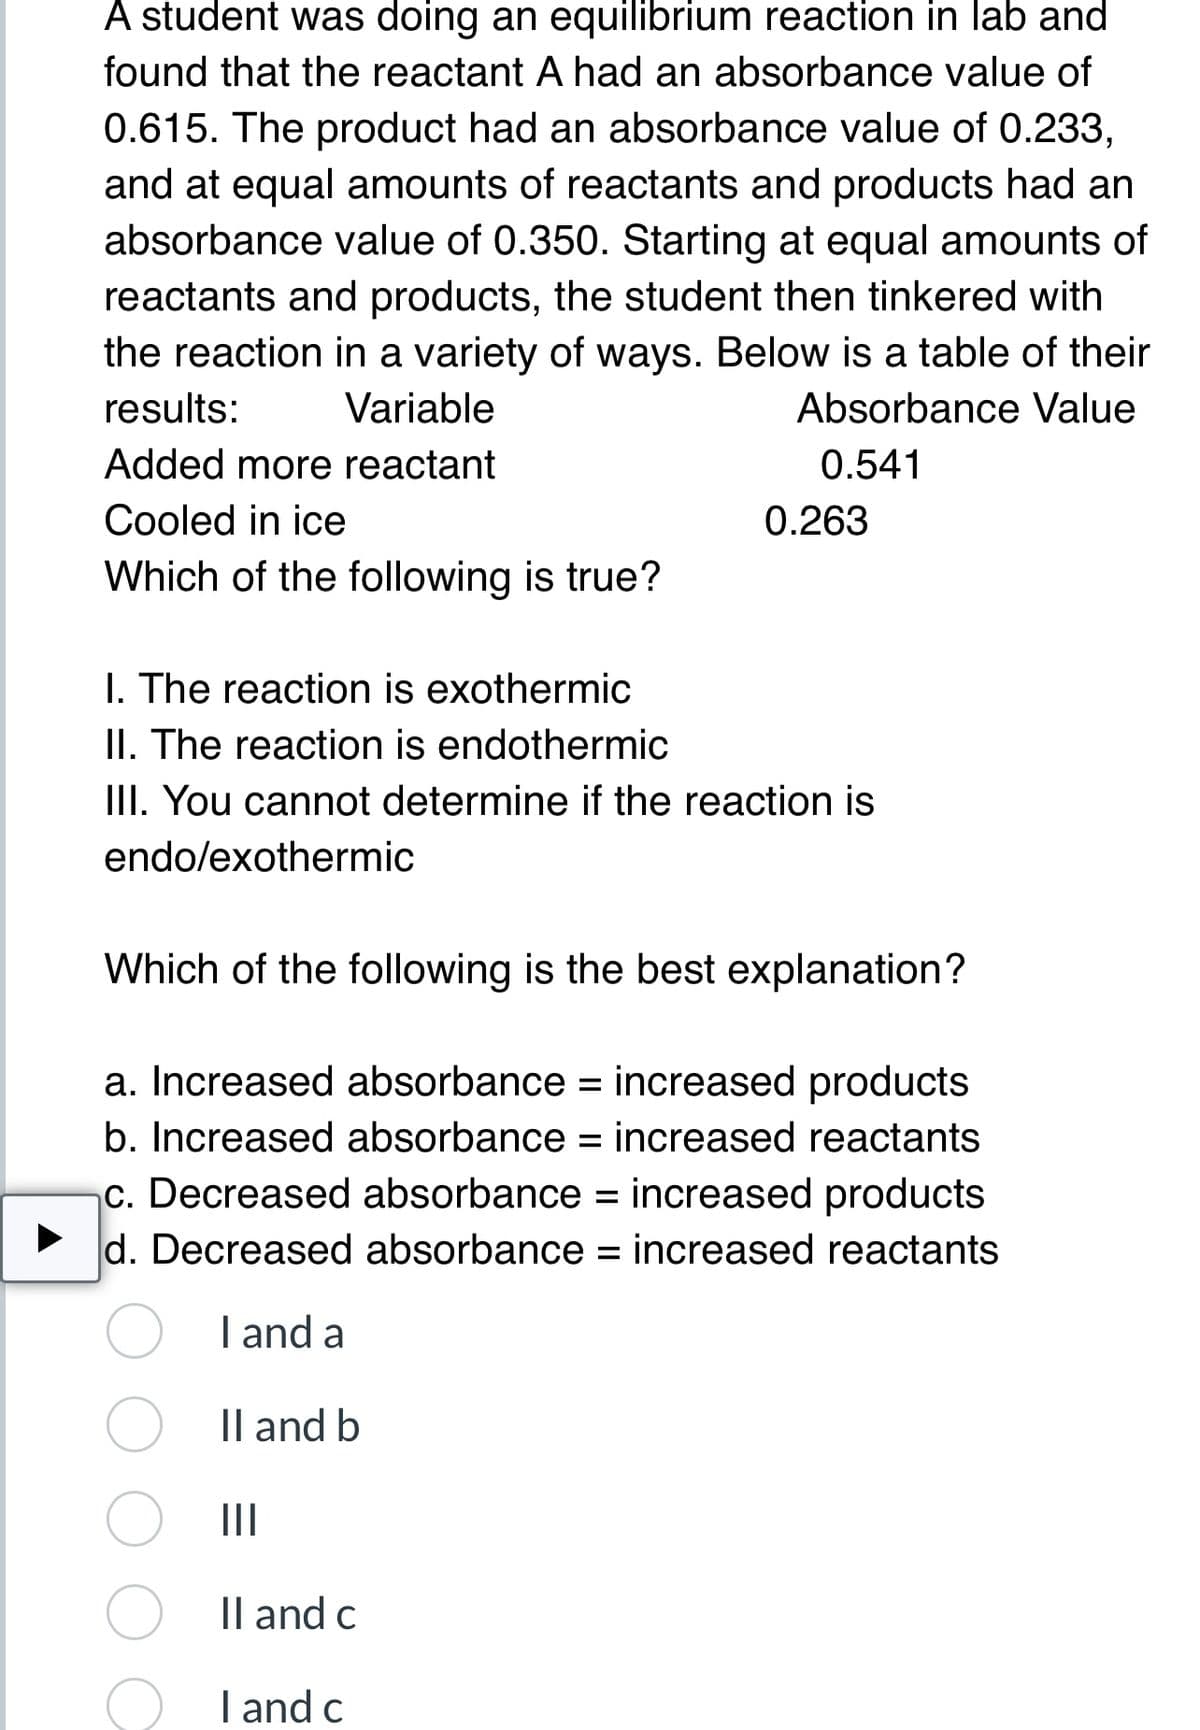 A student was doing an equilibrium reaction in lab and
found that the reactant A had an absorbance value of
0.615. The product had an absorbance value of 0.233,
and at equal amounts of reactants and products had an
absorbance value of 0.350. Starting at equal amounts of
reactants and products, the student then tinkered with
the reaction in a variety of ways. Below is a table of their
results: Variable
Absorbance Value
0.541
Added more reactant
Cooled in ice
Which of the following is true?
I. The reaction is exothermic
II. The reaction is endothermic
III. You cannot determine if the reaction is
endo/exothermic
0.263
Which of the following is the best explanation?
a. Increased absorbance = increased products
b. Increased absorbance = increased reactants
c. Decreased absorbance = increased products
d. Decreased absorbance = increased reactants
I and a
Il and b
|||
Il and c
I and c